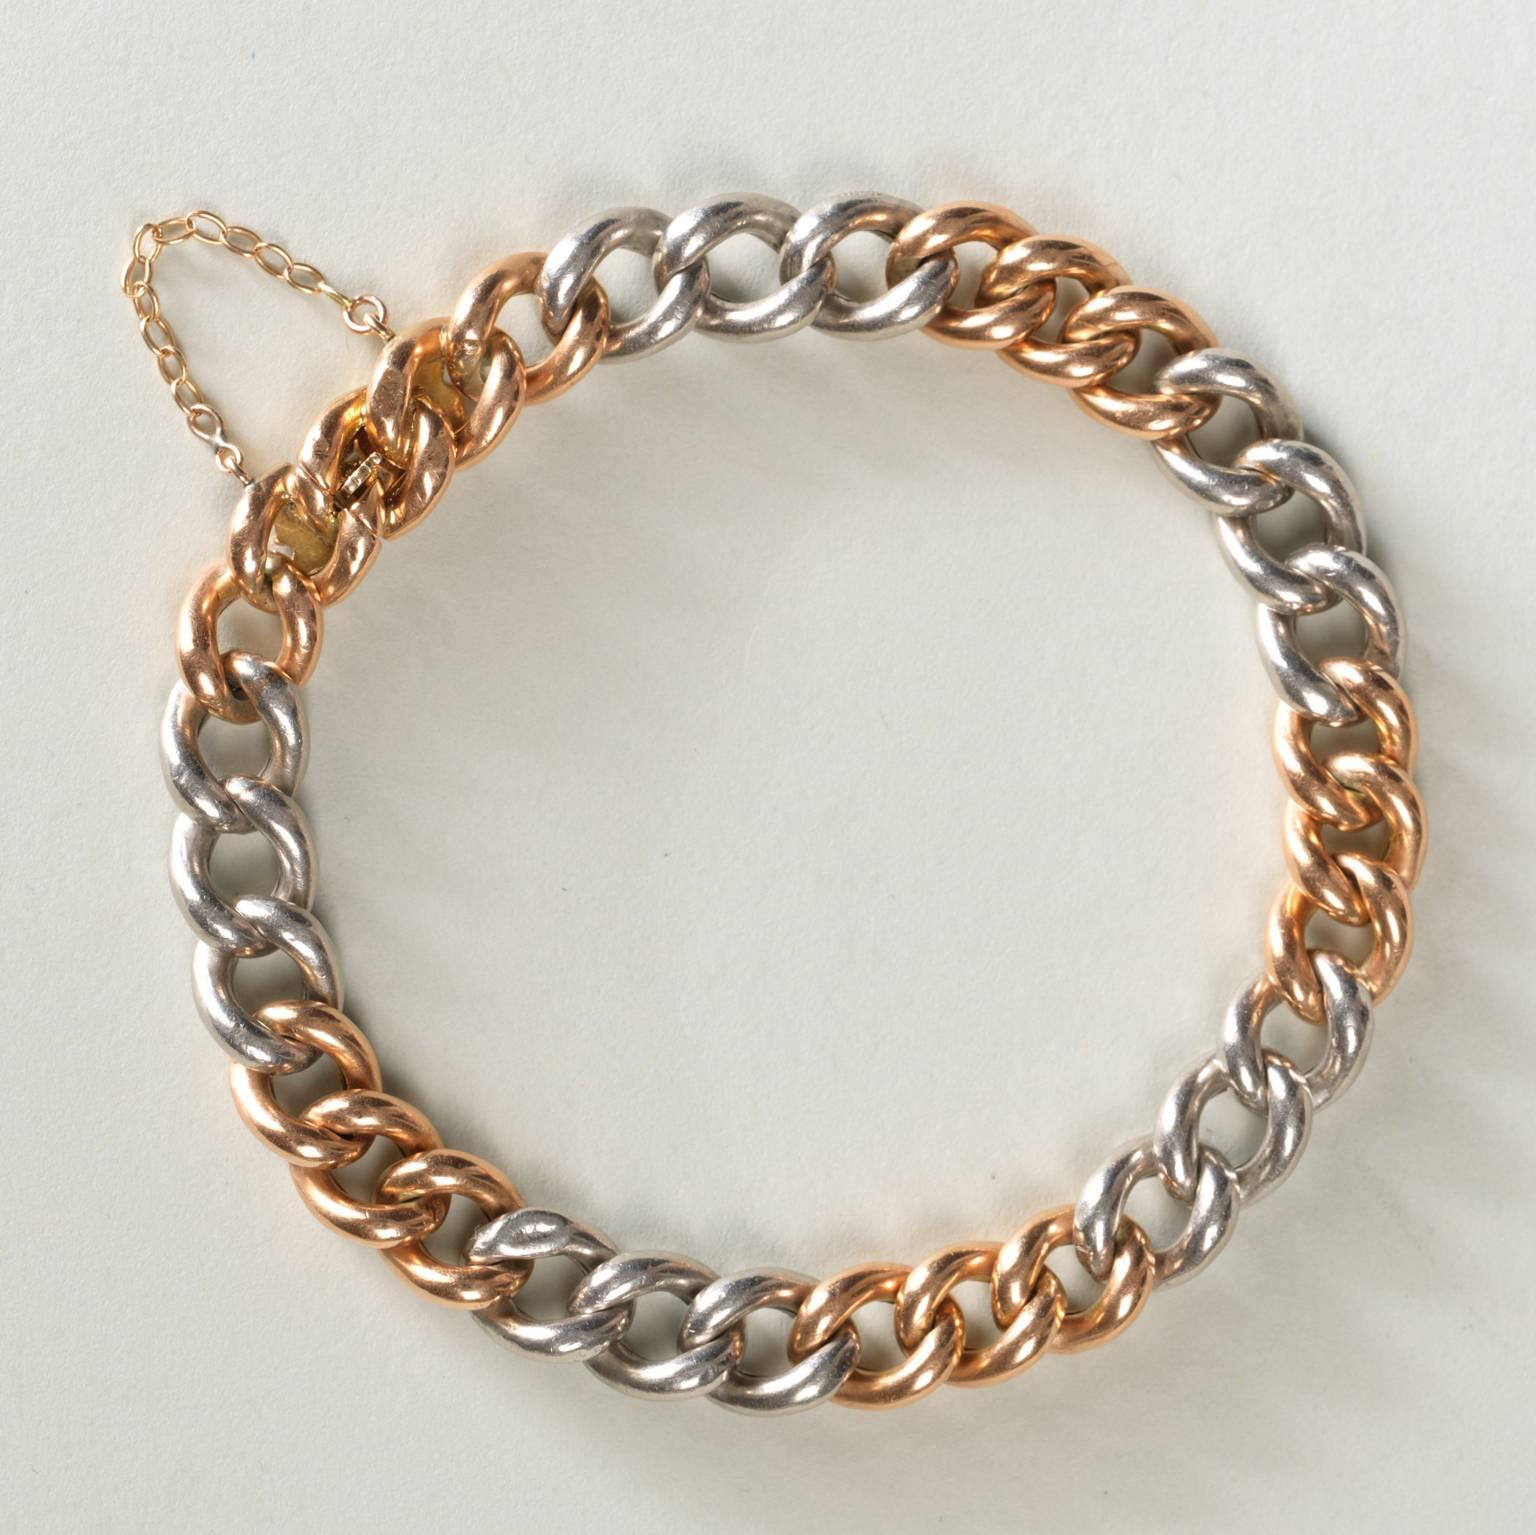 A 15 carat gold and platinum curb link bracelet, 19th century, England.

weight: 23.99 grams
dimensions: 20 x 0.9 cm